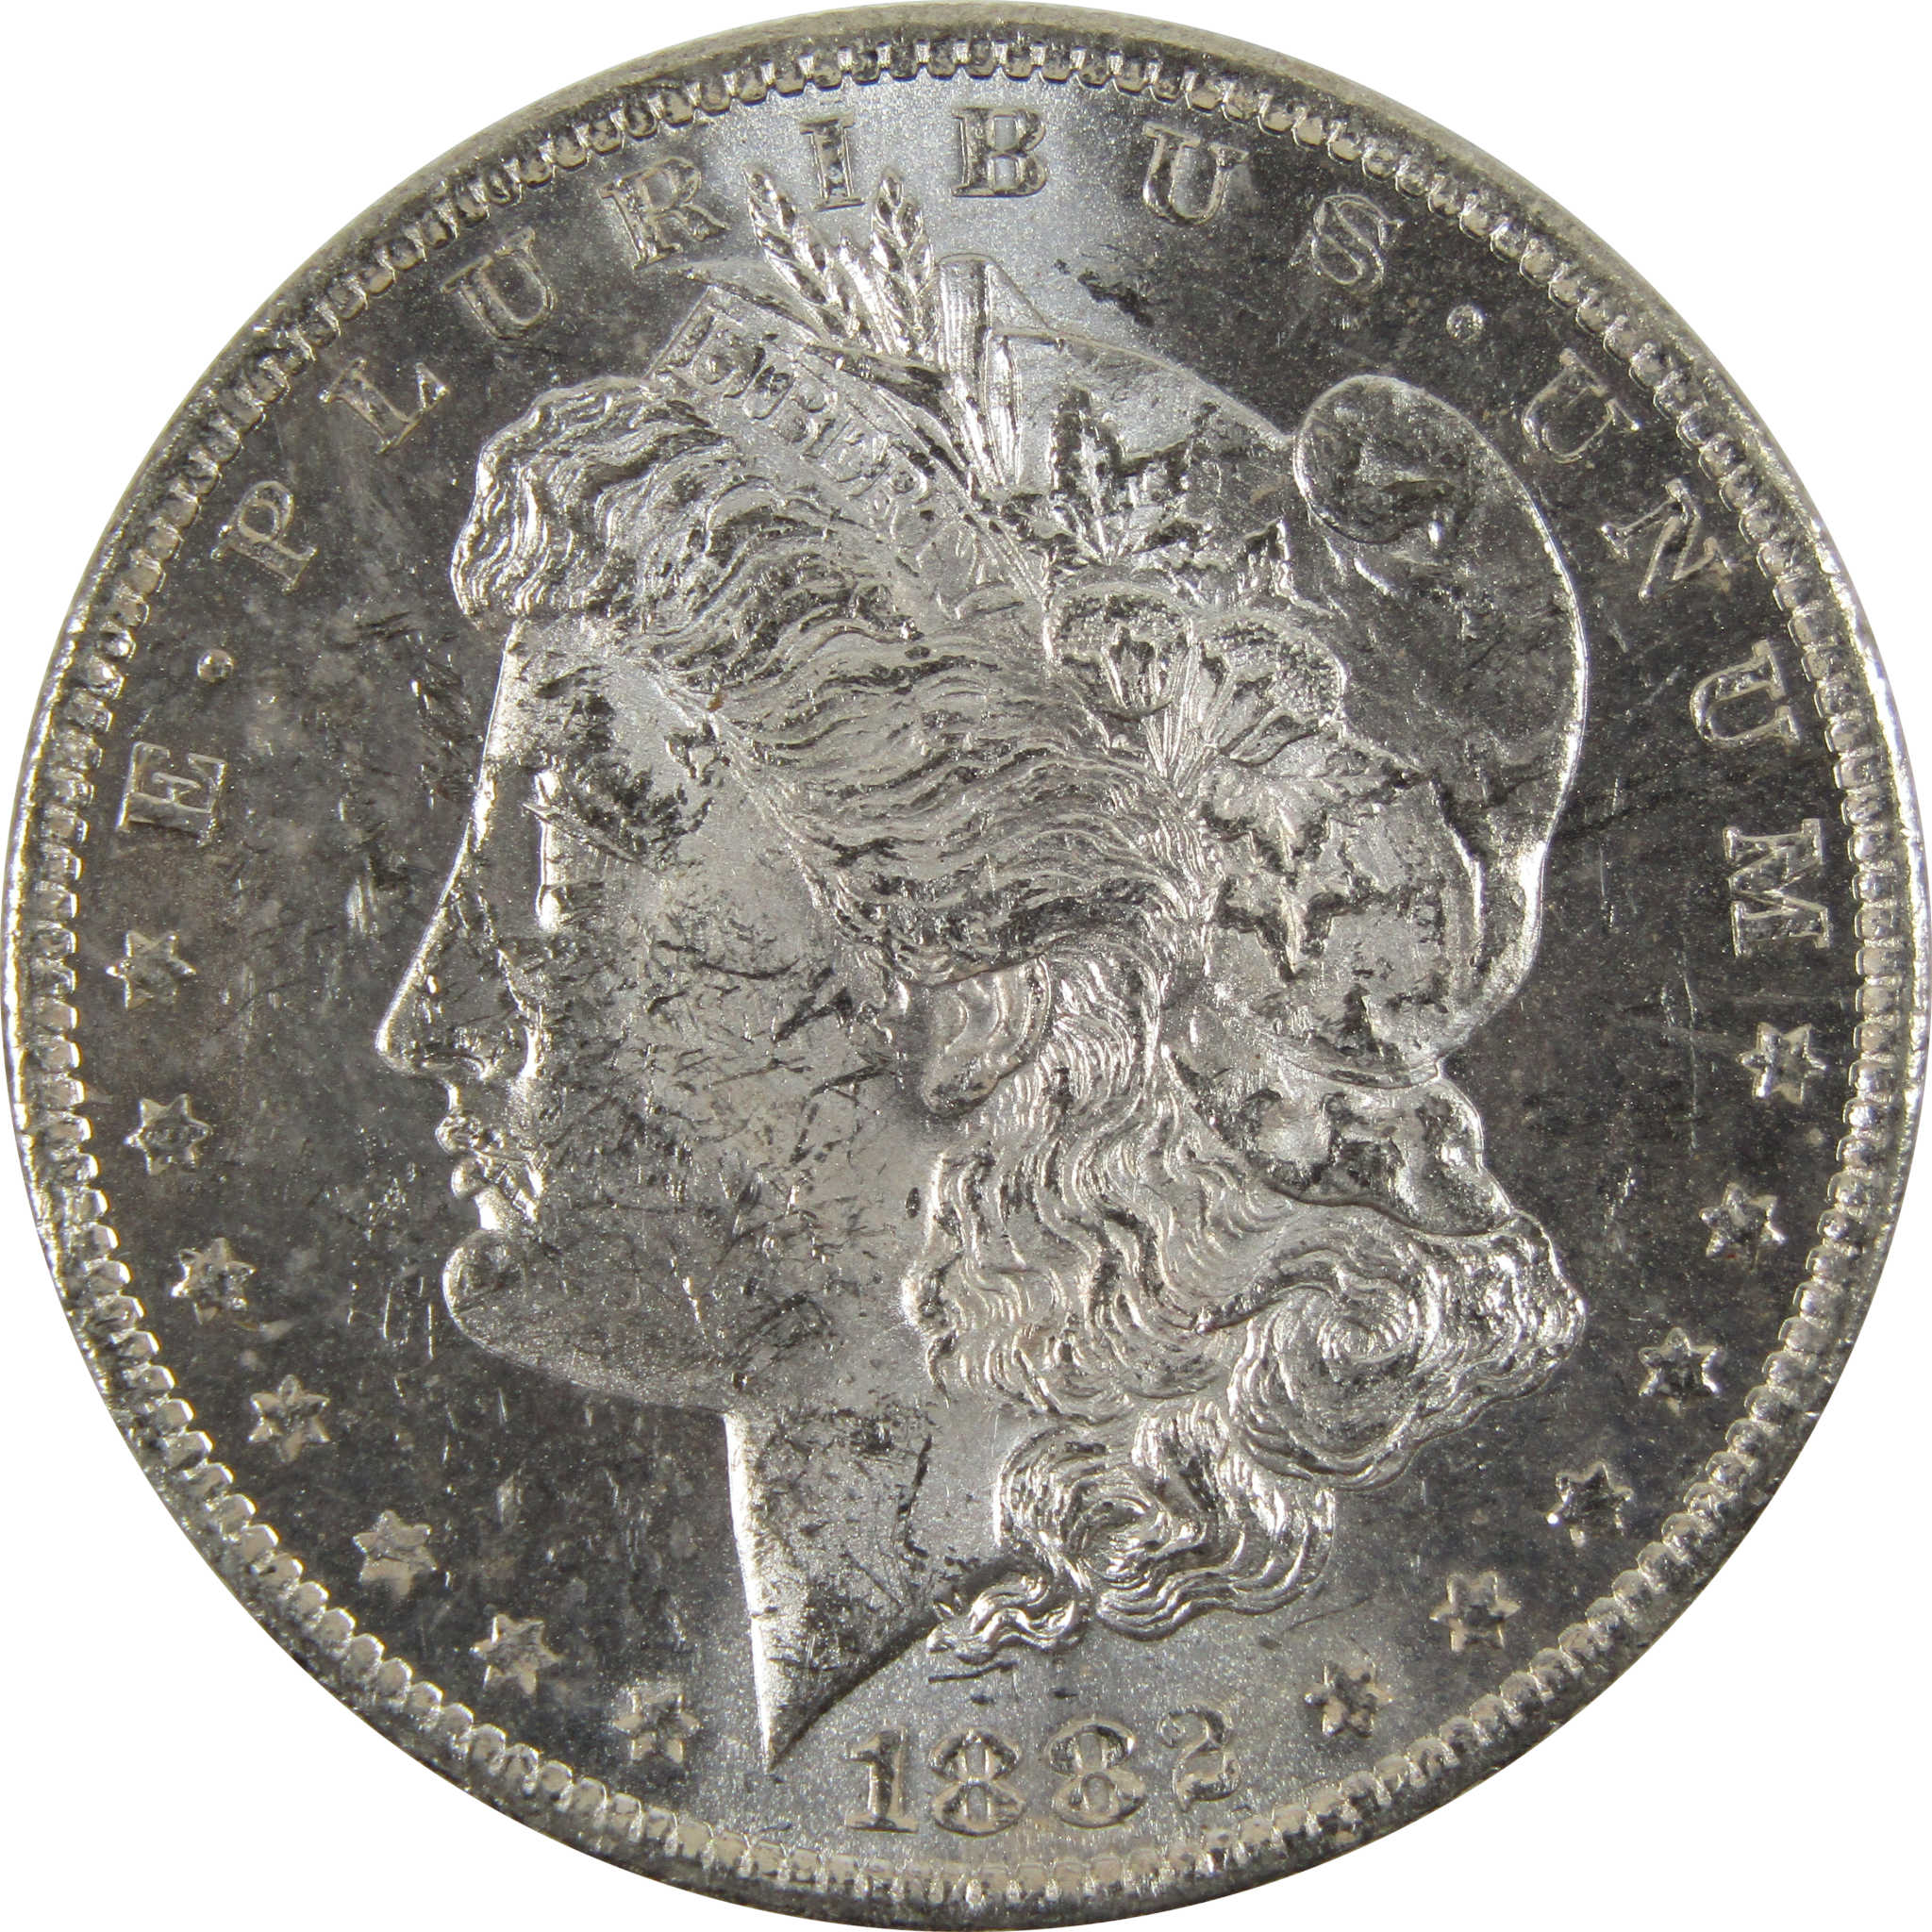 1882 O/O Morgan Dollar AU About Uncirculated 90% Silver $1 SKU:I8887 - Morgan coin - Morgan silver dollar - Morgan silver dollar for sale - Profile Coins &amp; Collectibles